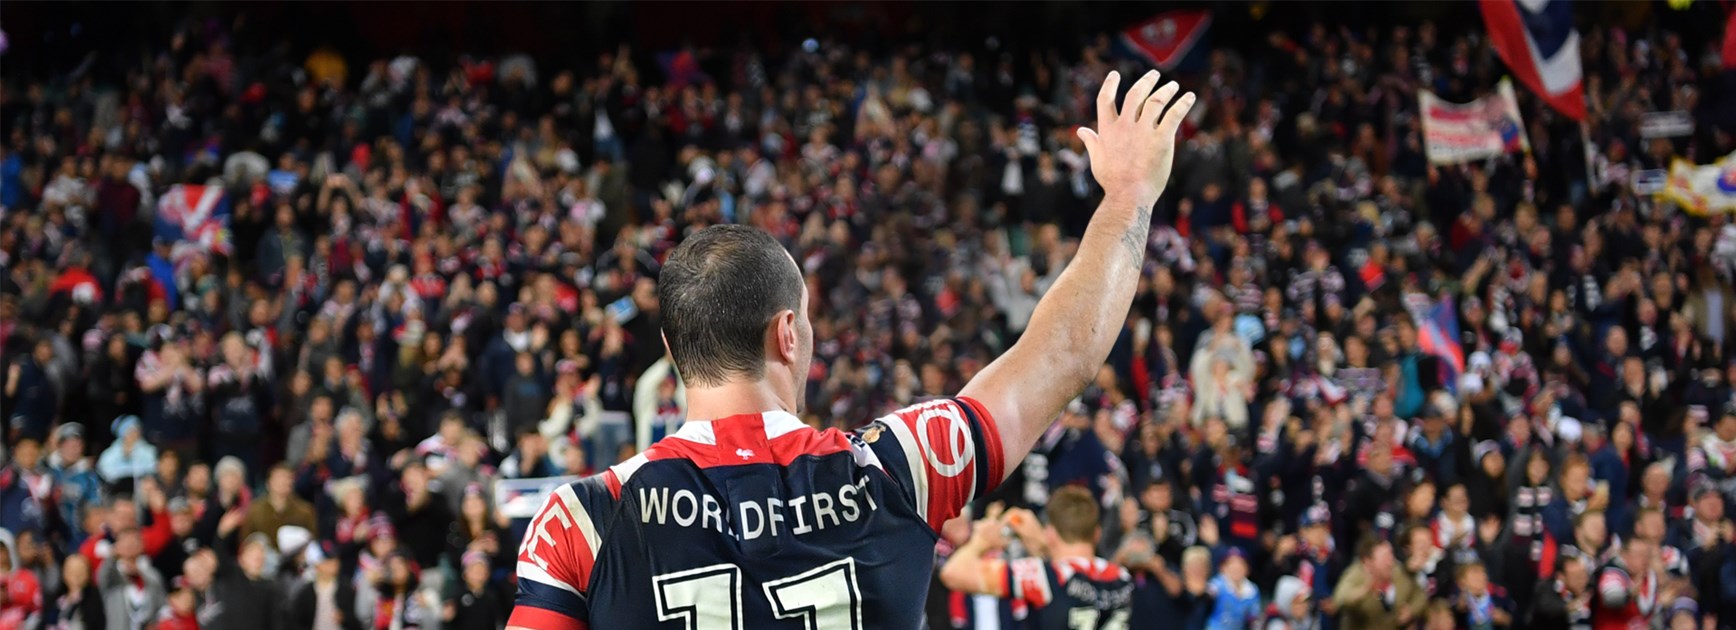 Roosters Farewell Allianz Stadium With Epic Final Battle